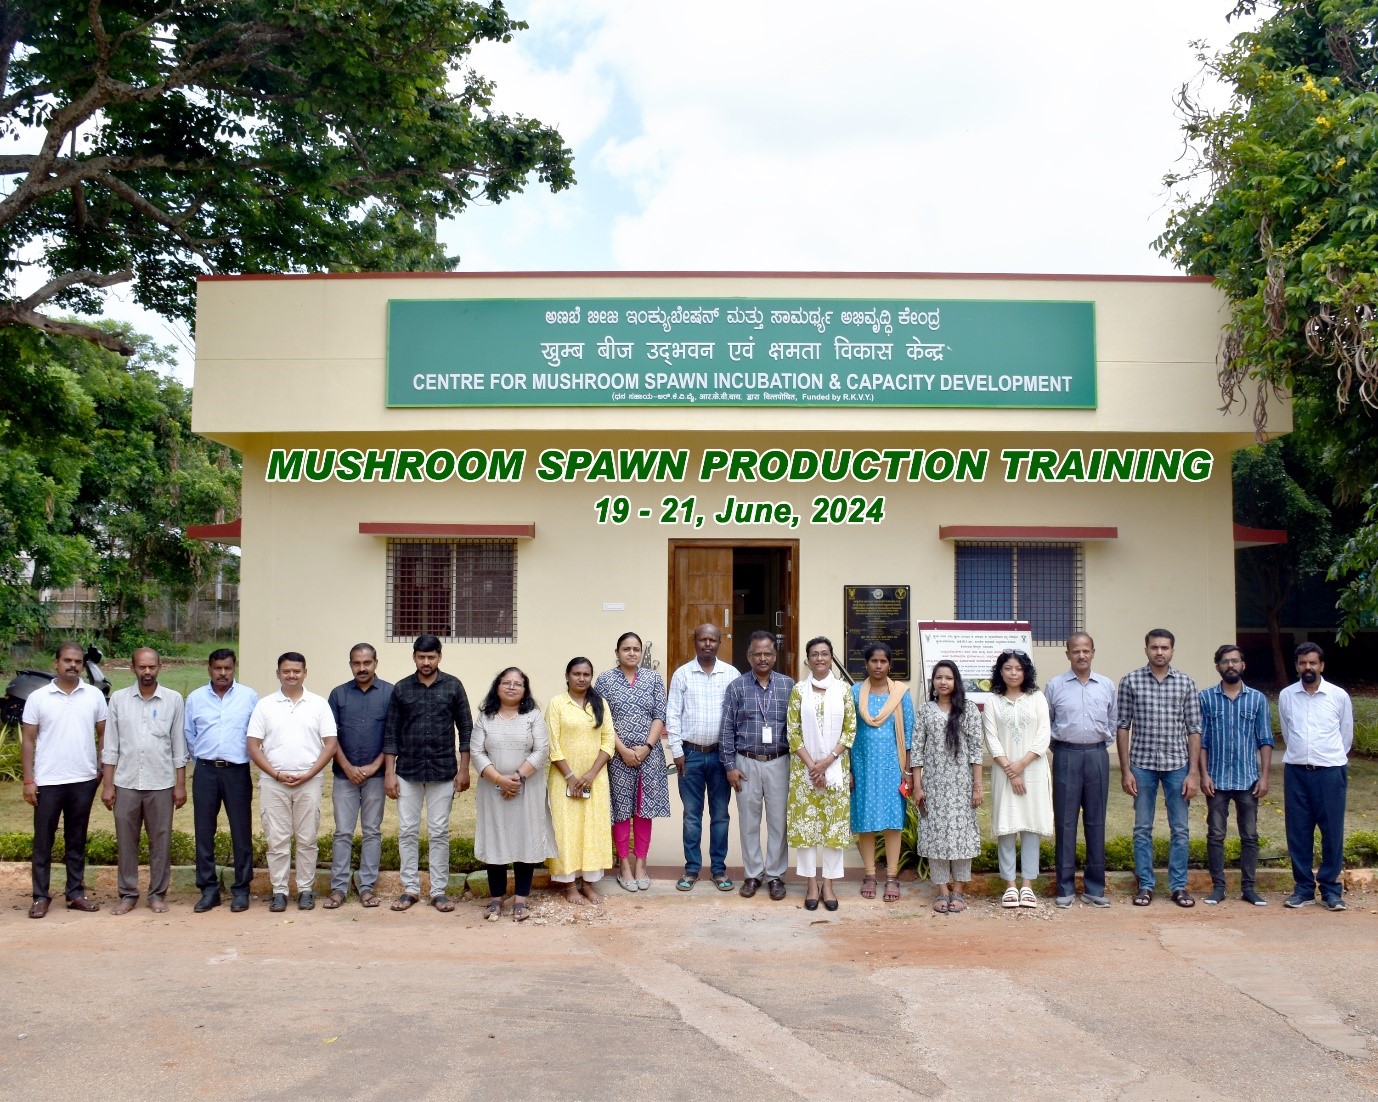 Training on Spawn Production and Mushroom Cultivation held at ICAR-IIHR in June, 2024